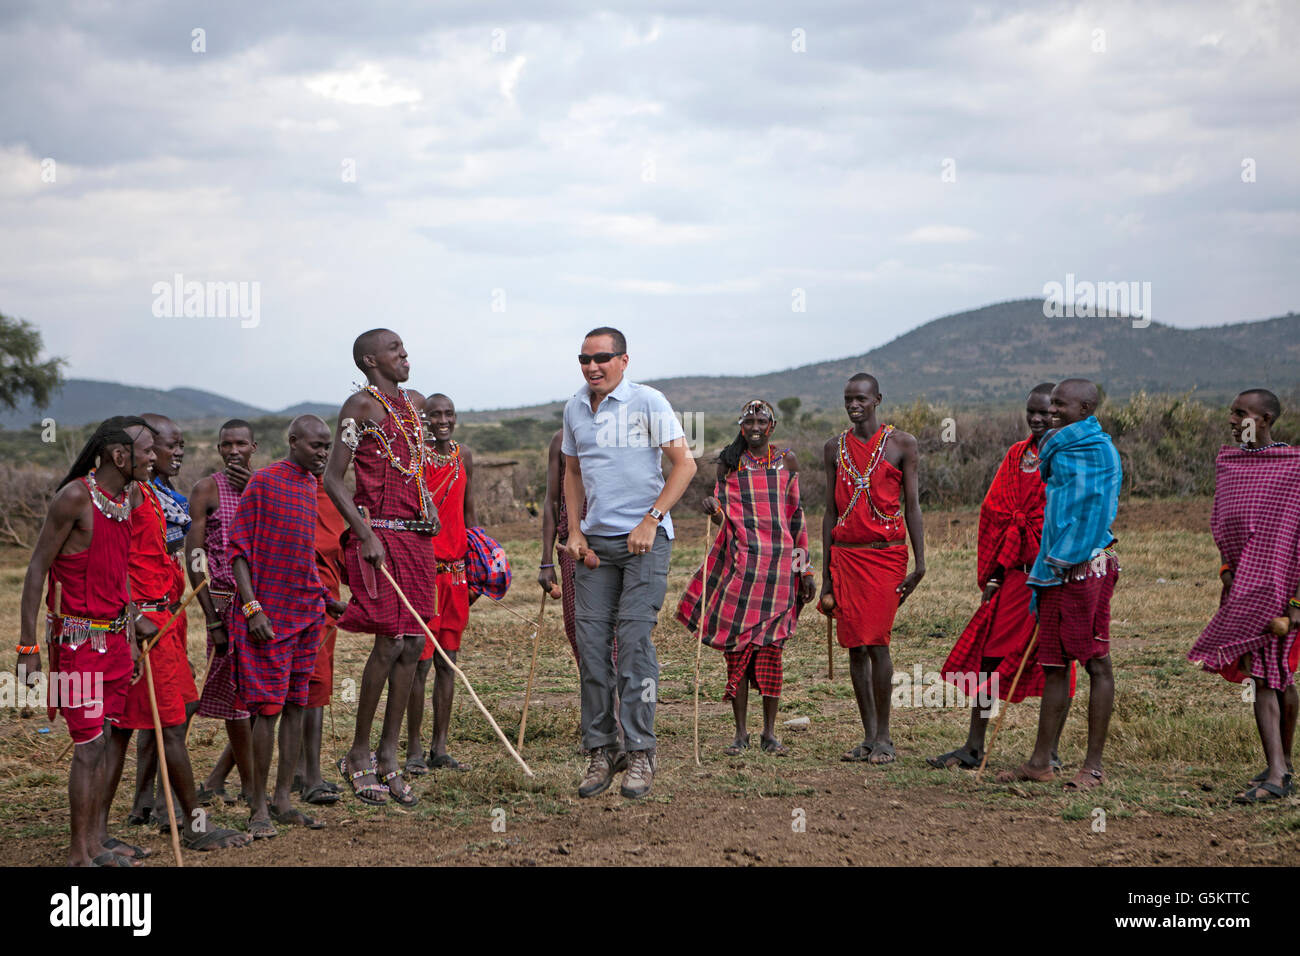 Group of Masai warriors and one tourist doing a ceremonial dance in a Maaai village, Kenya, Africa. Stock Photo